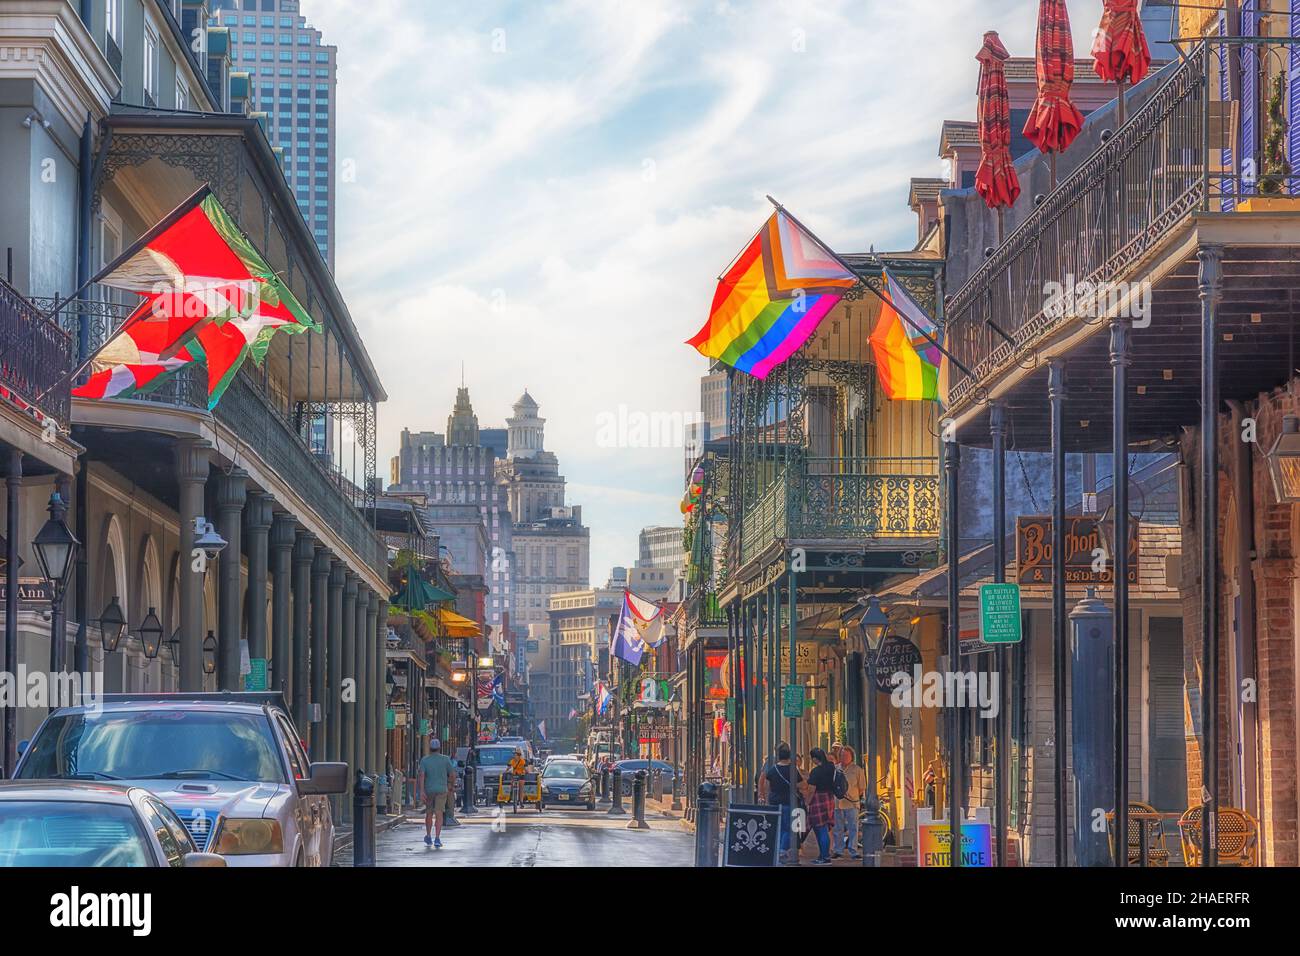 New Orleans Bourbon Street view looking toward the Central Business District in the late afternoon. Stock Photo